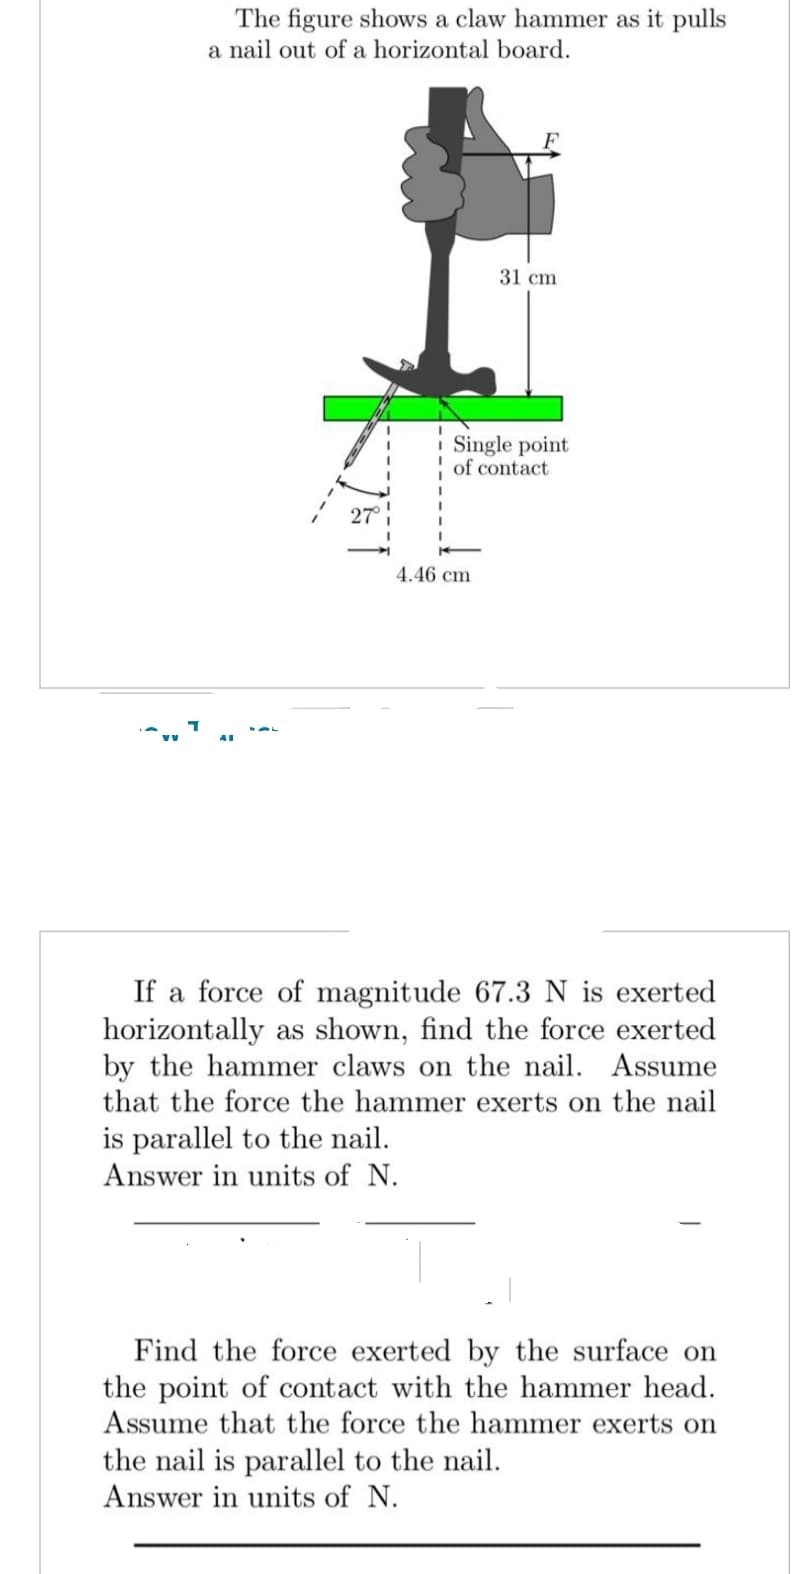 The figure shows a claw hammer as it pulls
a nail out of a horizontal board.
31 cm
Single point
of contact
4.46 cm
If a force of magnitude 67.3 N is exerted
horizontally as shown, find the force exerted
by the hammer claws on the nail. Assume
that the force the hammer exerts on the nail
is parallel to the nail.
Answer in units of N.
Find the force exerted by the surface on
the point of contact with the hammer head.
Assume that the force the hammer exerts on
the nail is parallel to the nail.
Answer in units of N.